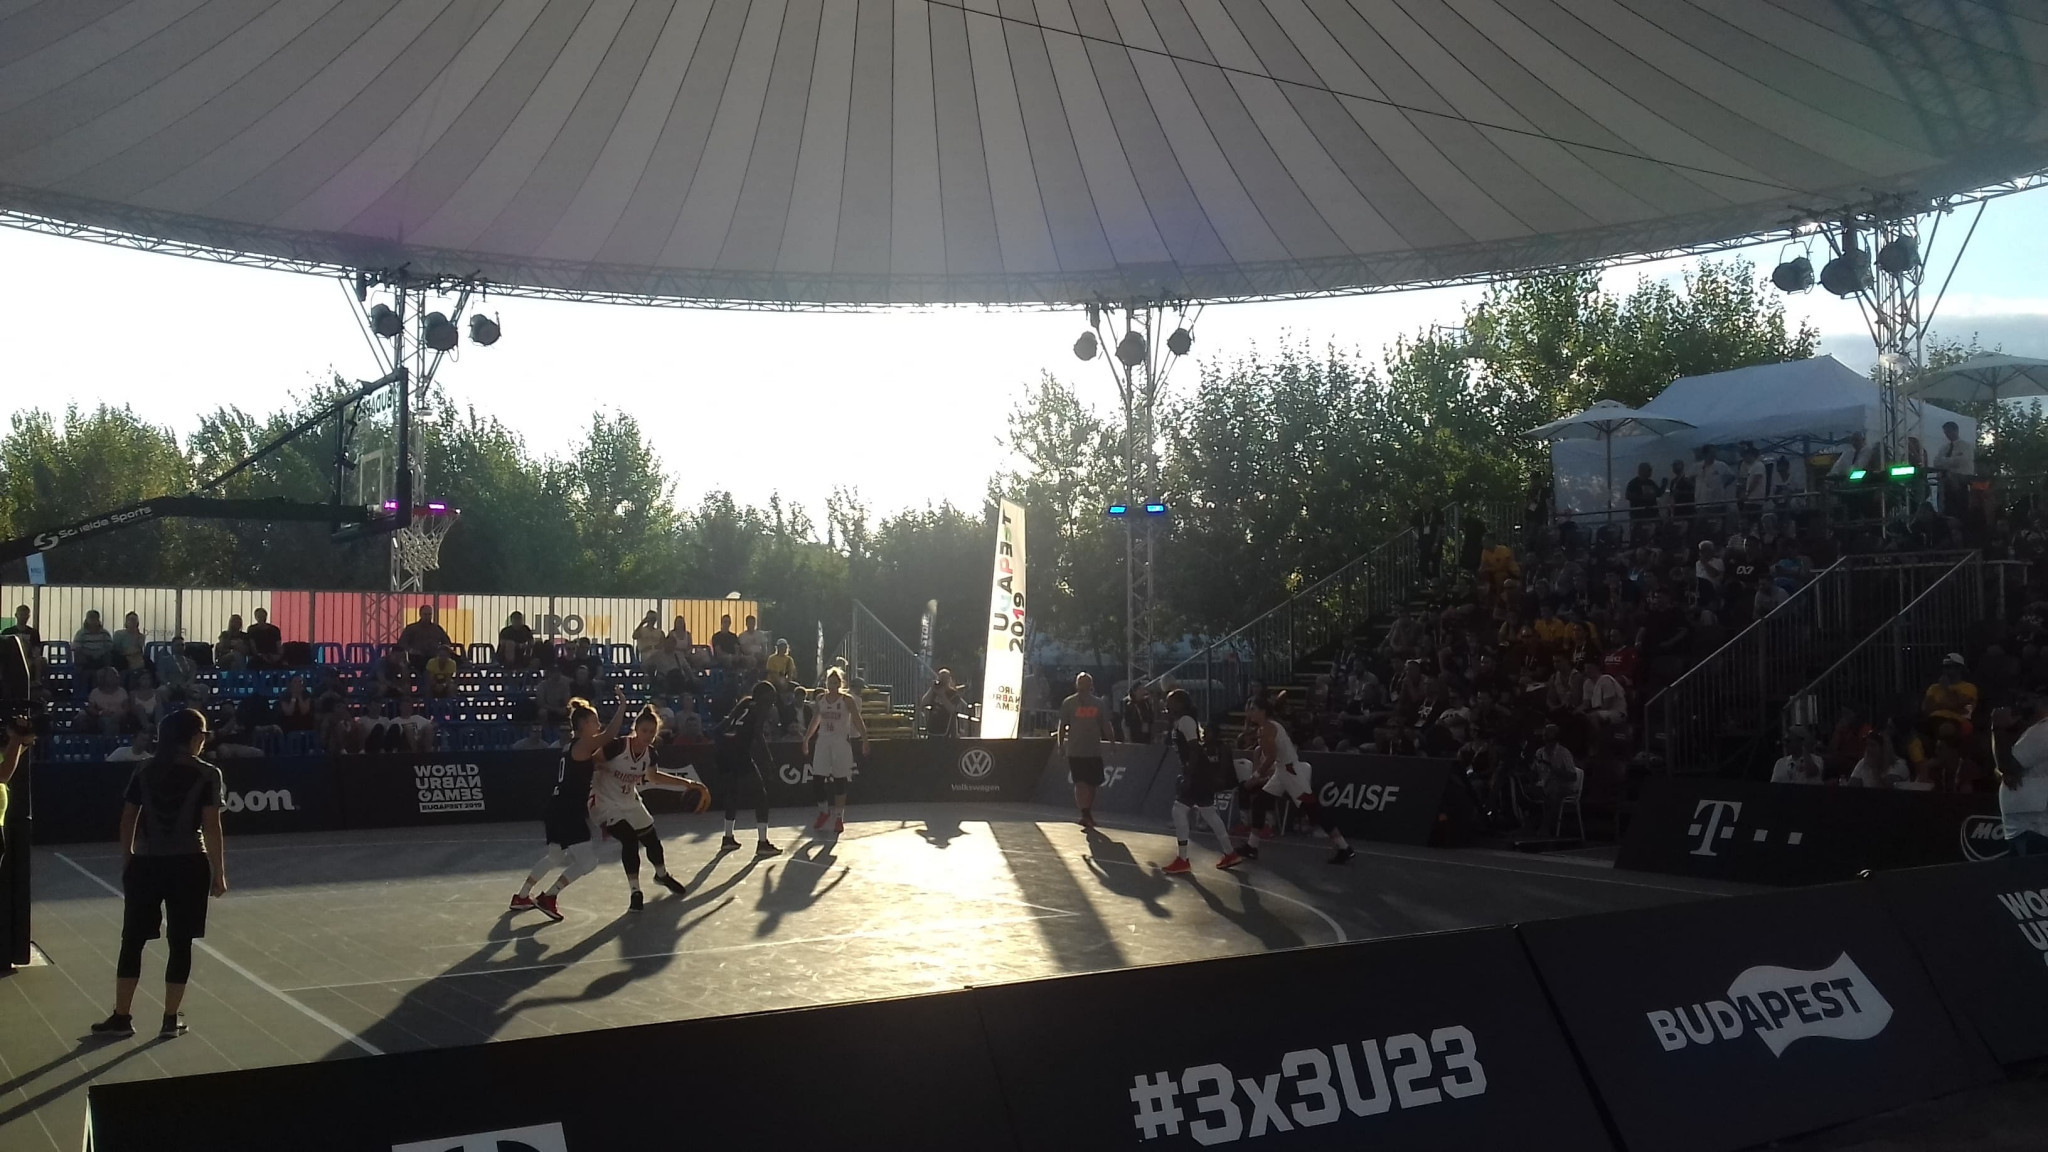 The first pool matches took place in the 3x3 basketball competitions ©ITG